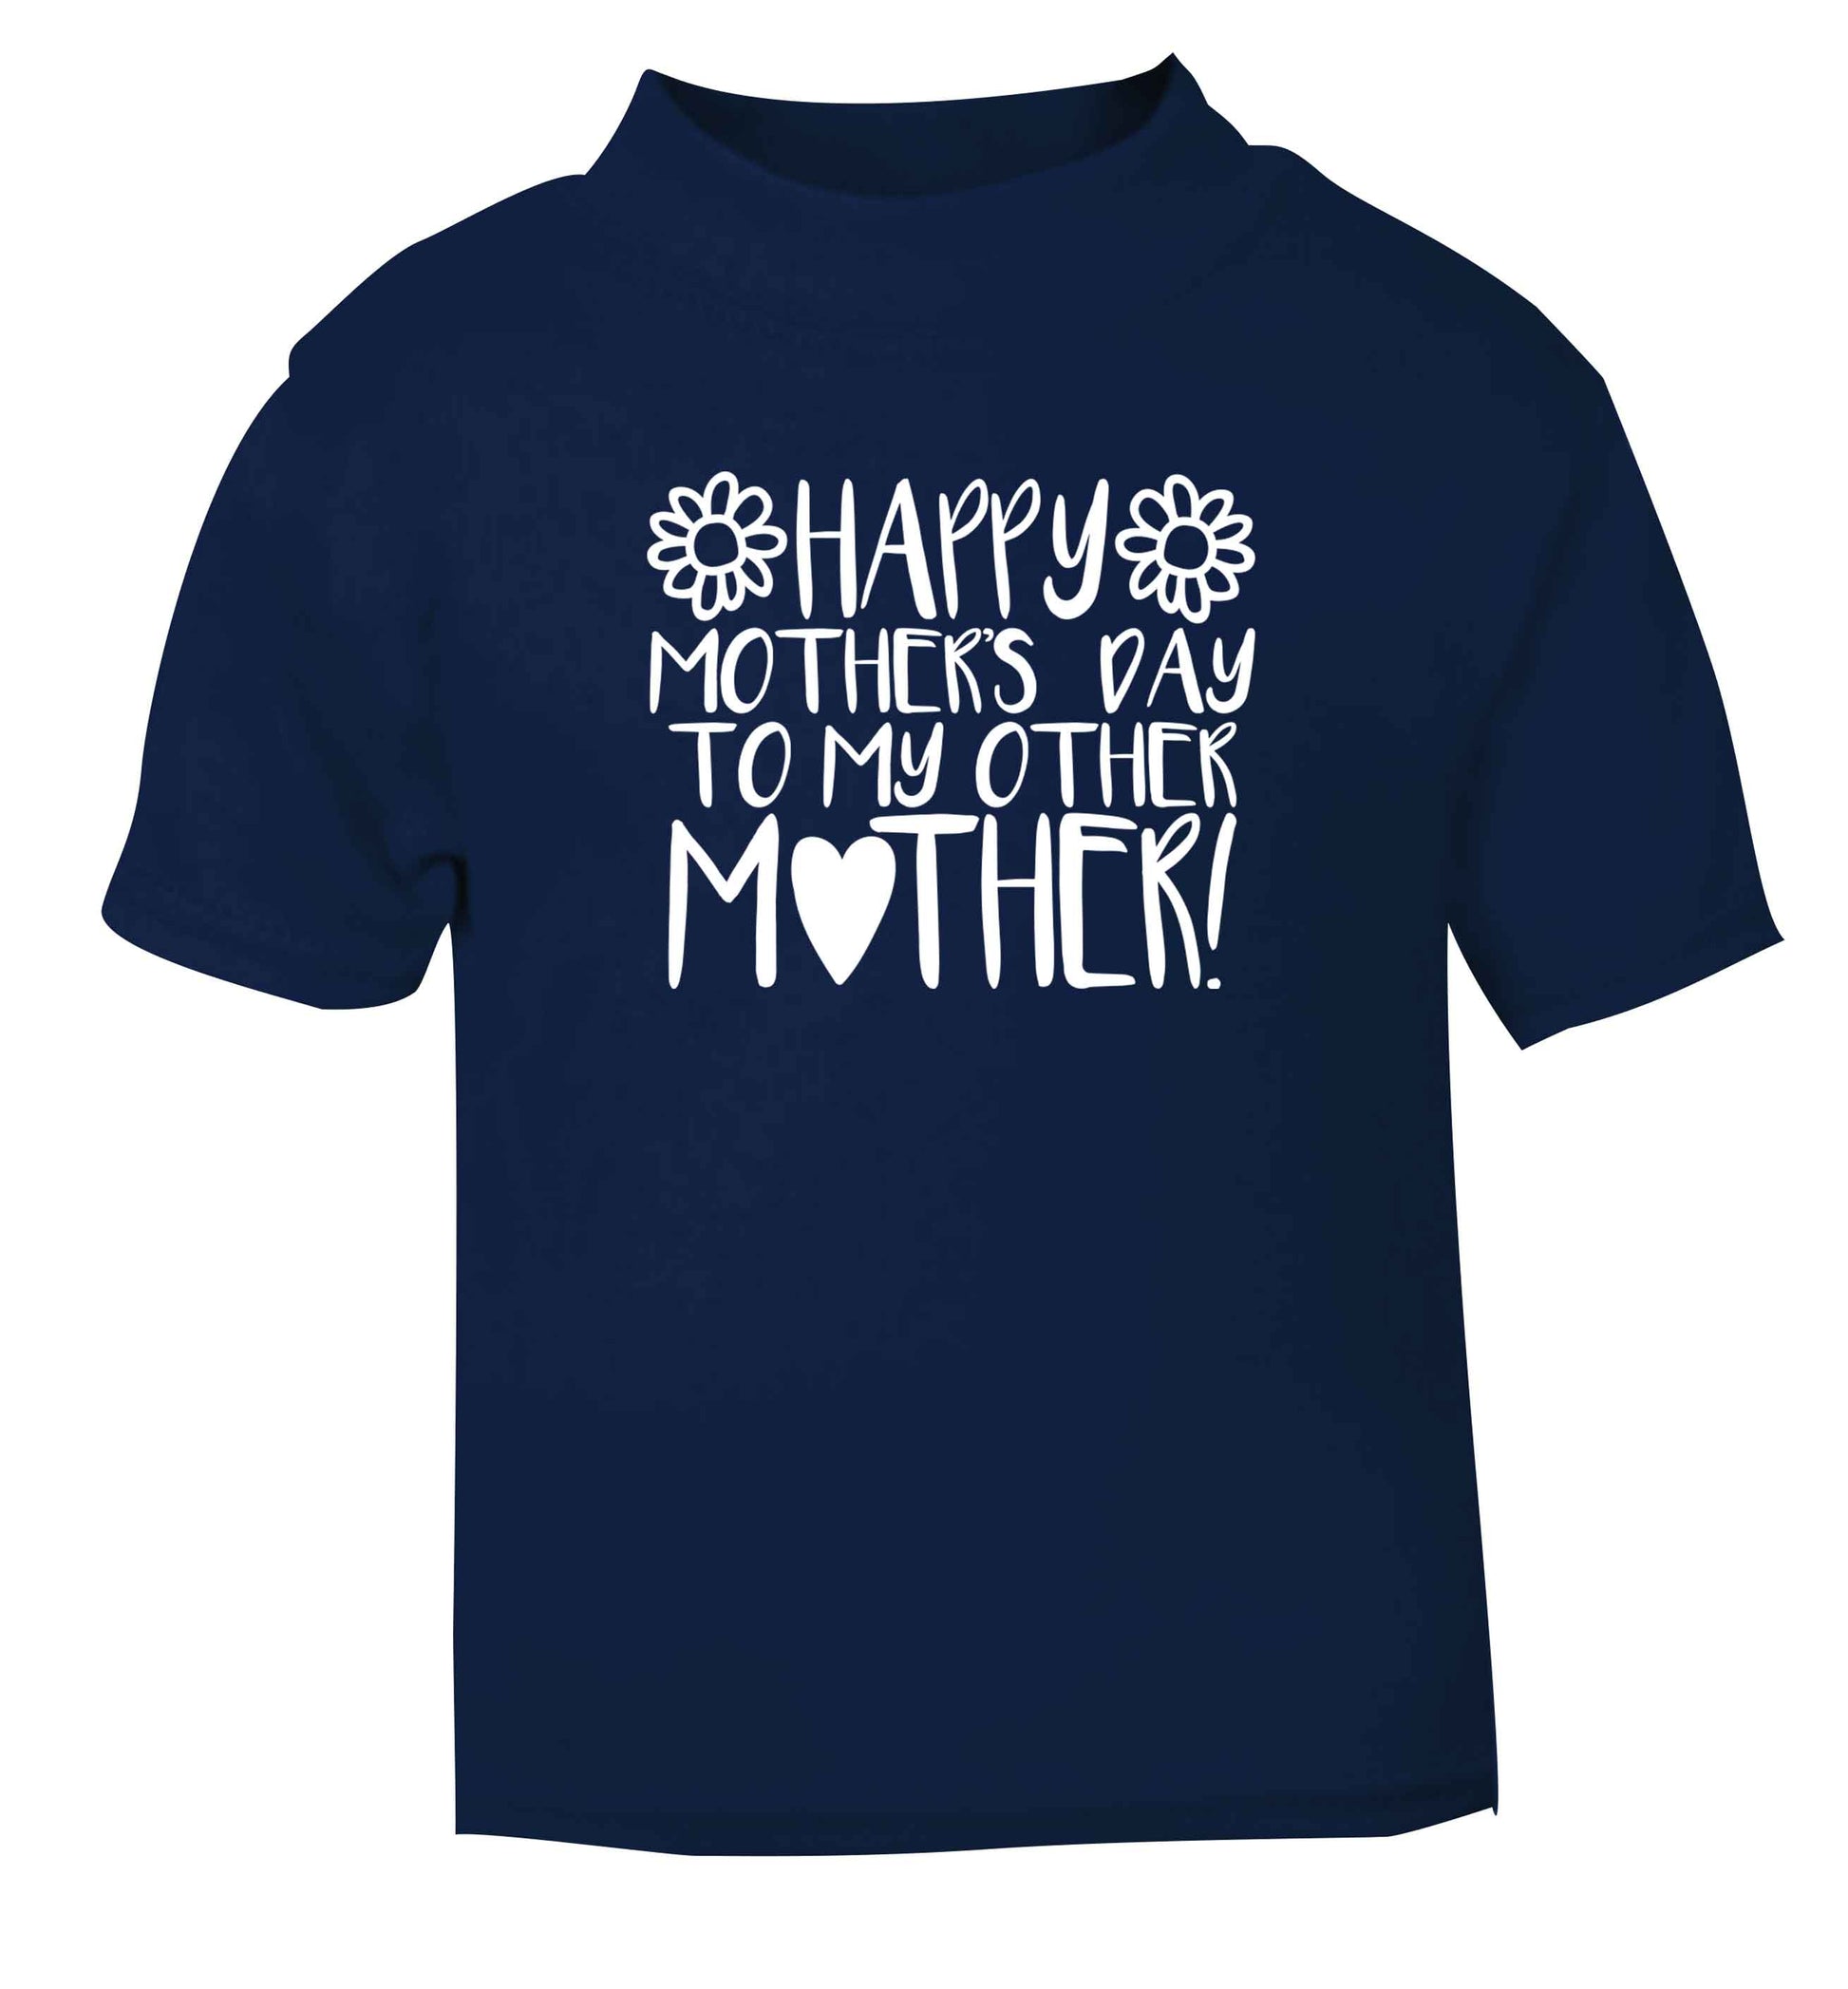 Happy mother's day to my other mother navy baby toddler Tshirt 2 Years